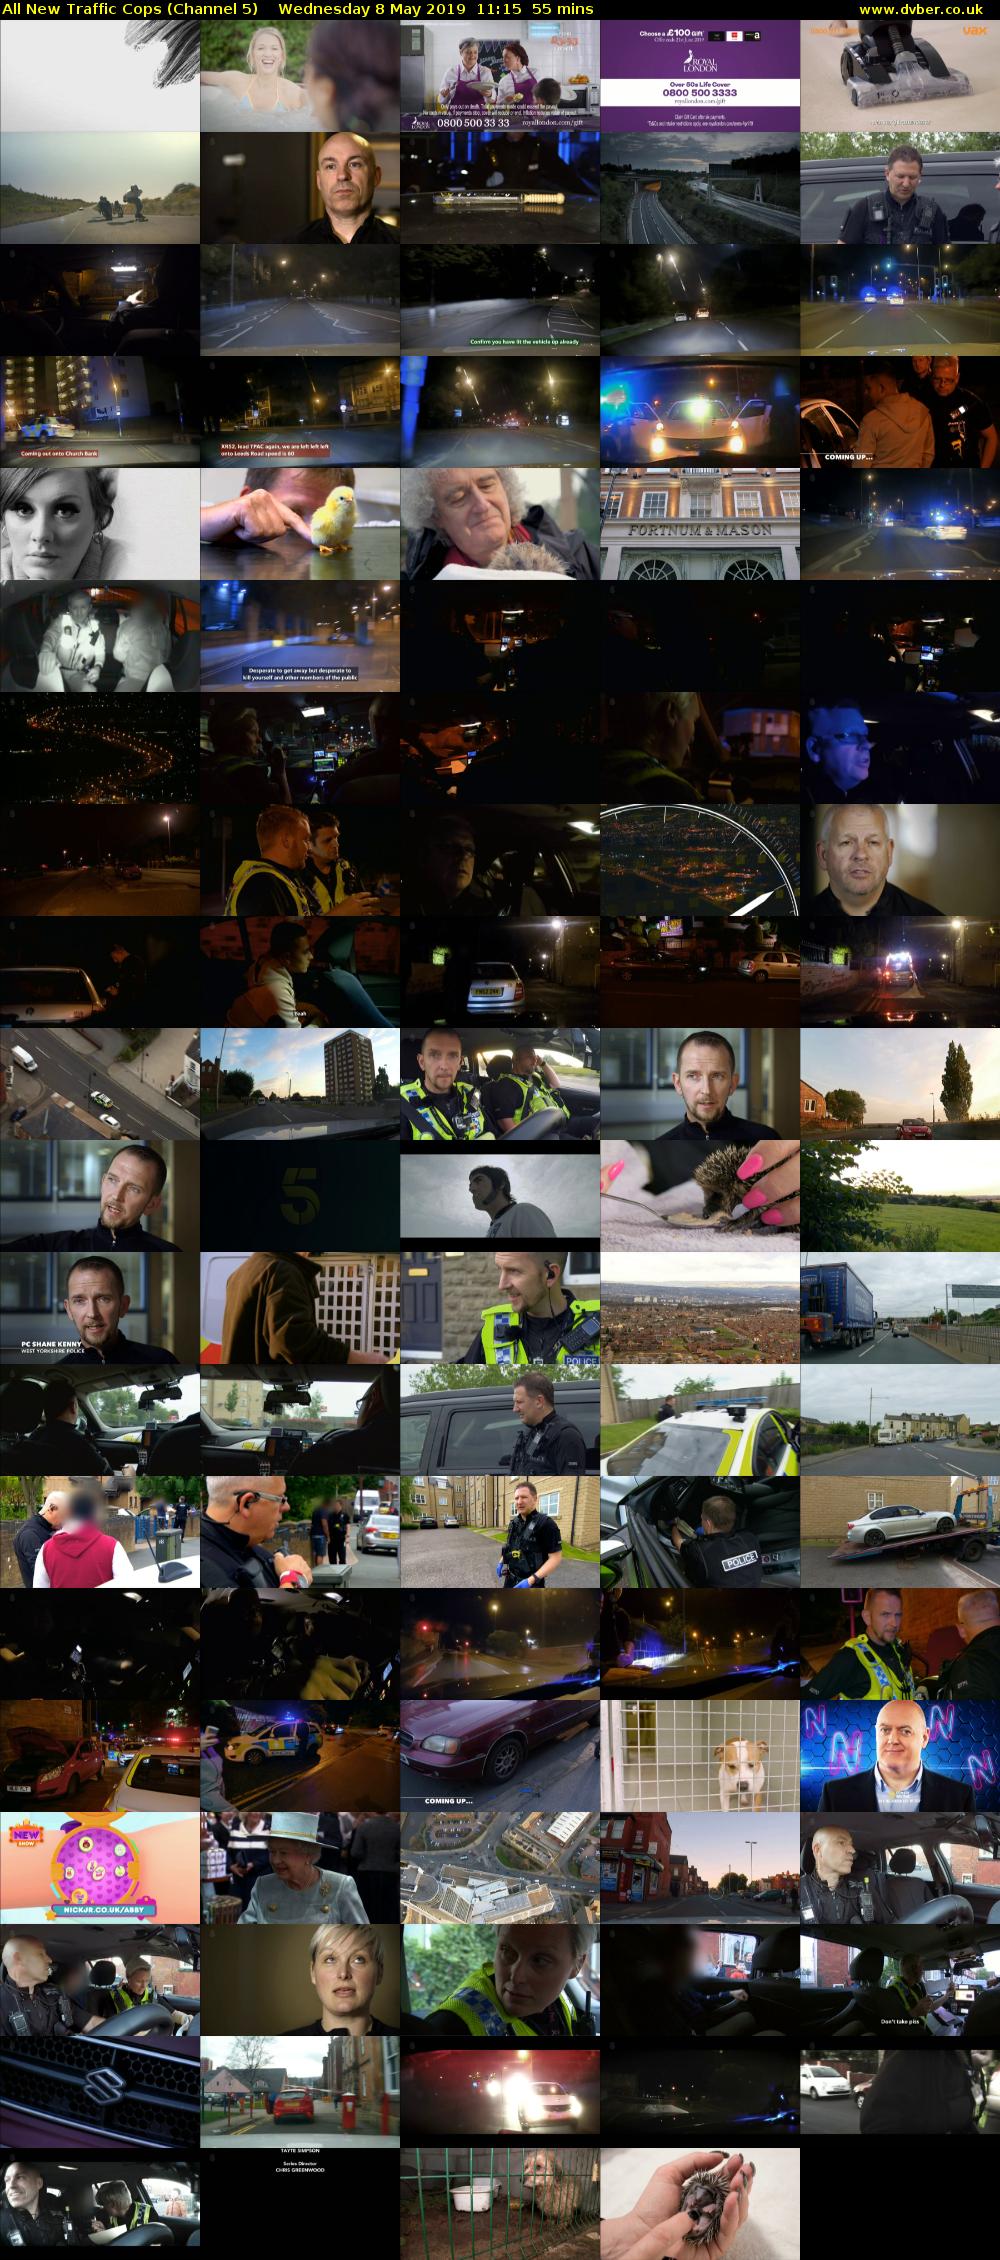 All New Traffic Cops (Channel 5) Wednesday 8 May 2019 11:15 - 12:10